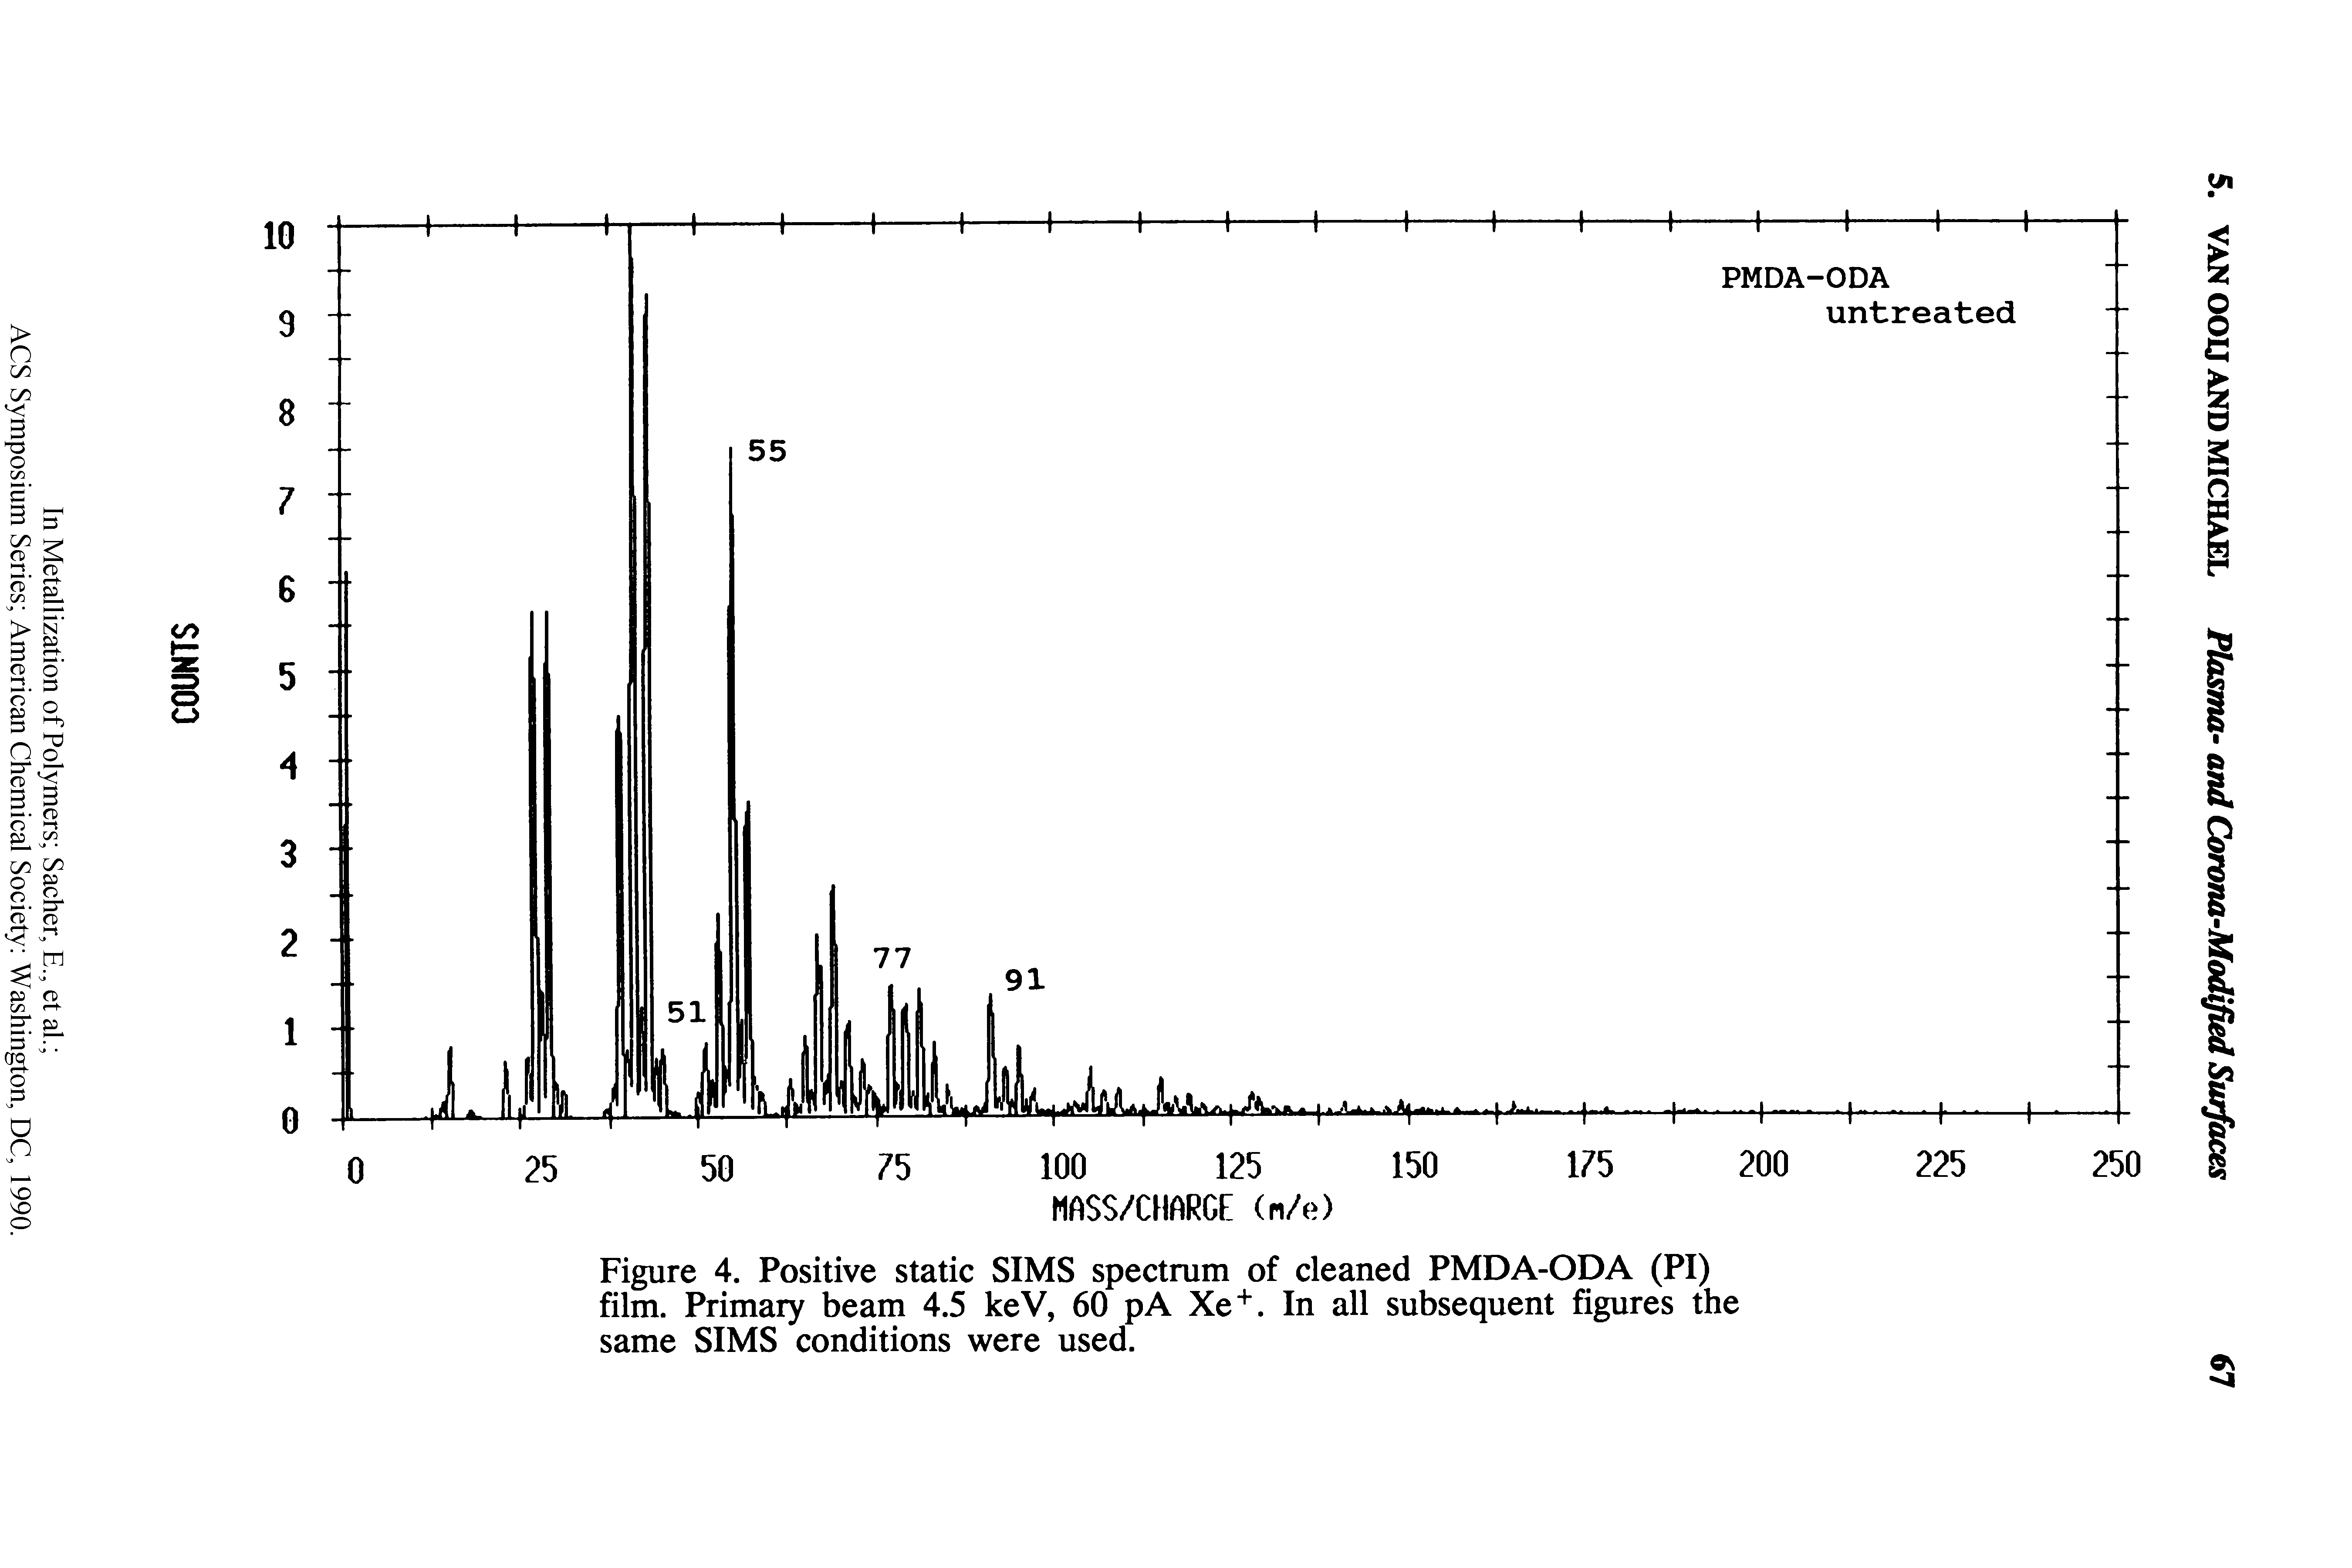 Figure 4. Positive static SIMS spectrum of cleaned PMDA-ODA (PI) film. Primary beam 4.5 keV, 60 pA Xe +. In all subsequent figures the same SIMS conditions were used.